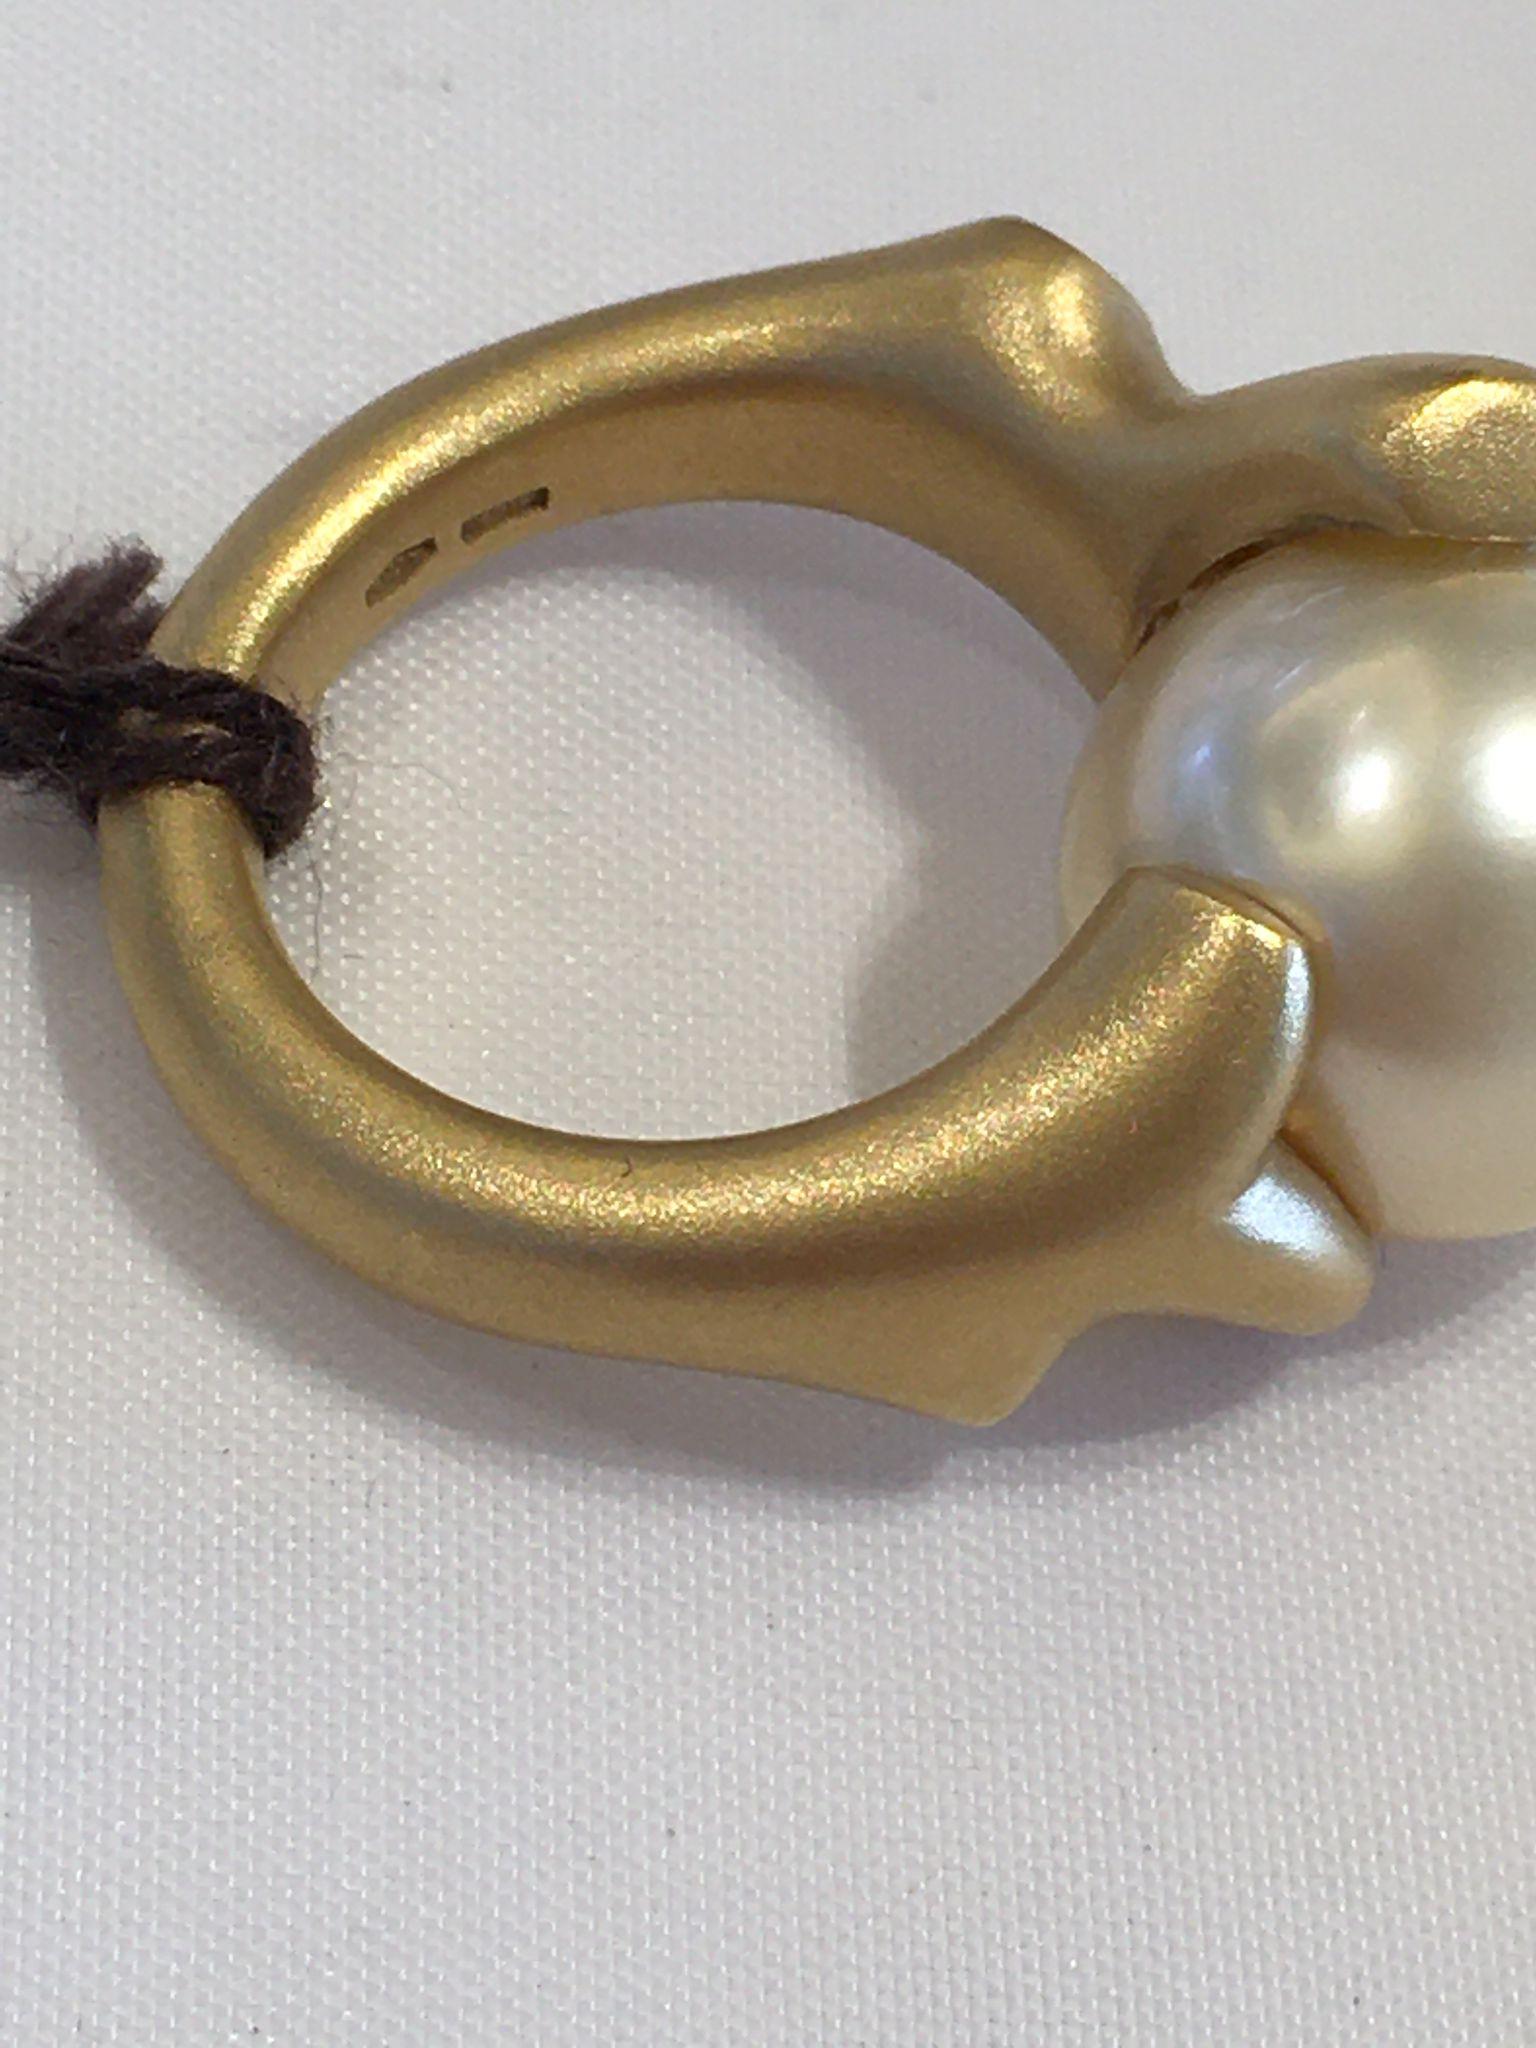 Brilliant Cut A brush 18kt yellow gold ring with a 5+ plus South Sea light pearl. For Sale